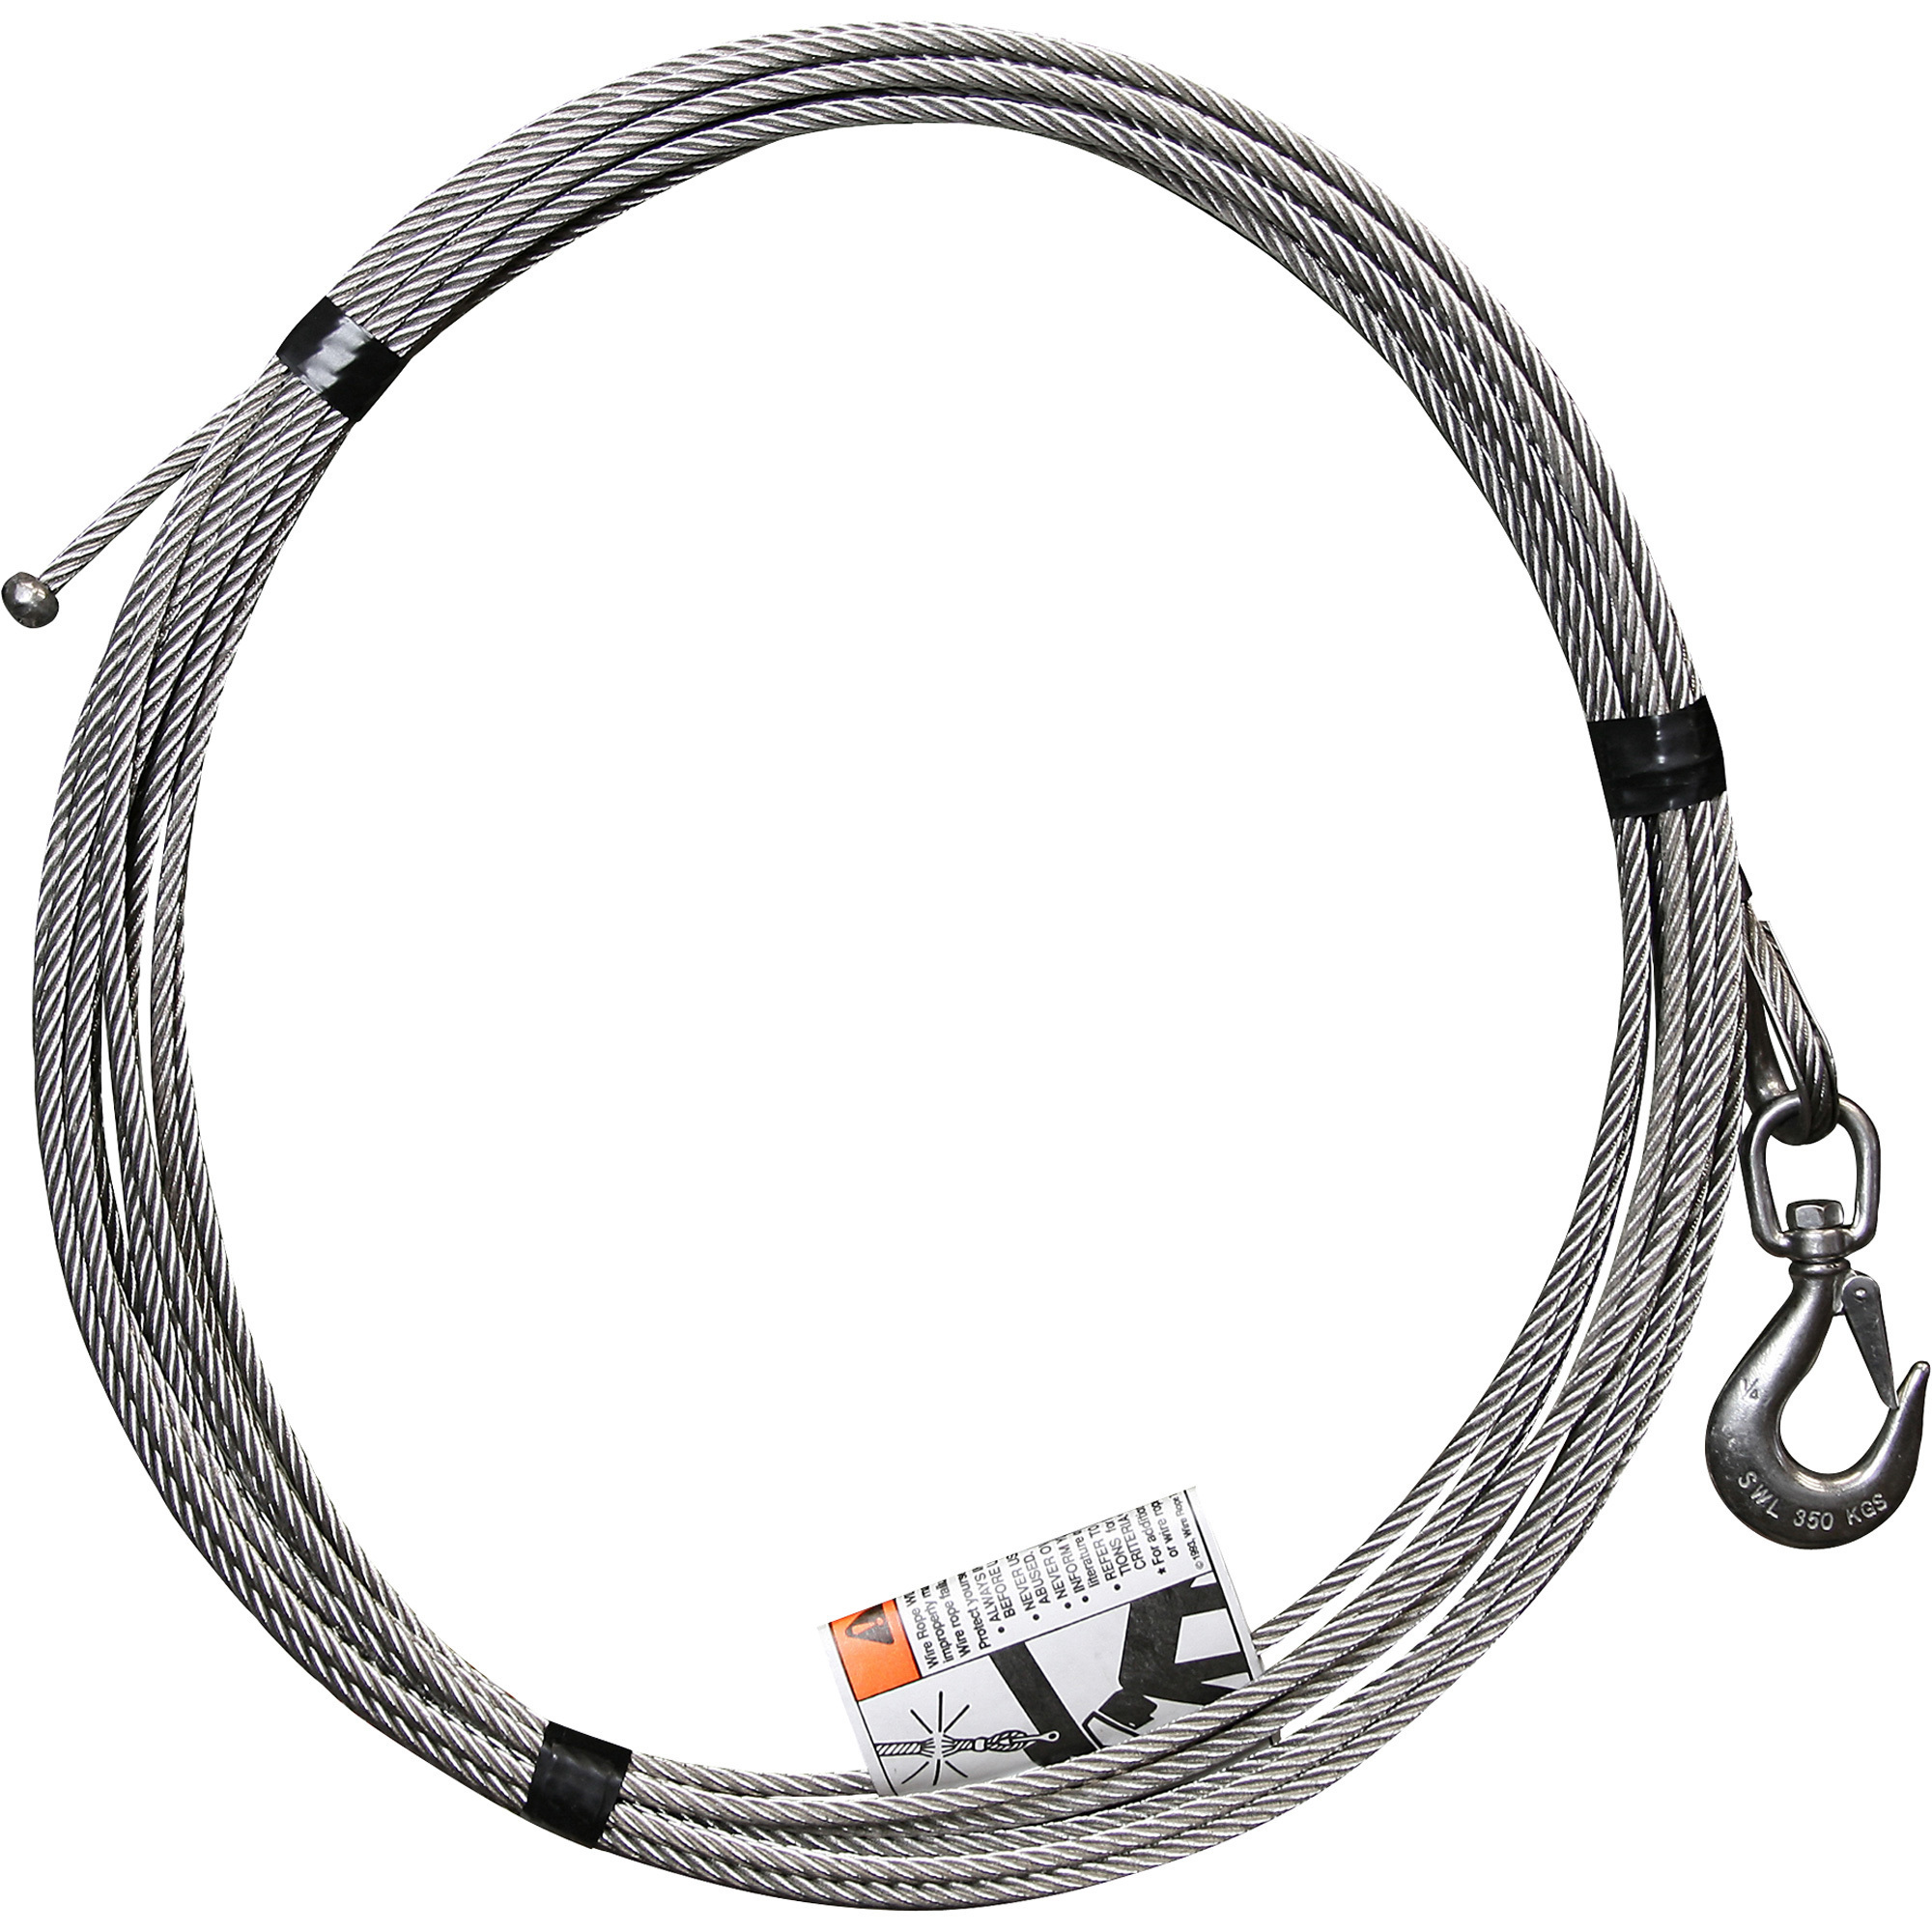 OZ Lifting Products Stainless Steel Wire Rope Assembly â 1/4Inch x 55ft.L, Model OZSS.25-55B